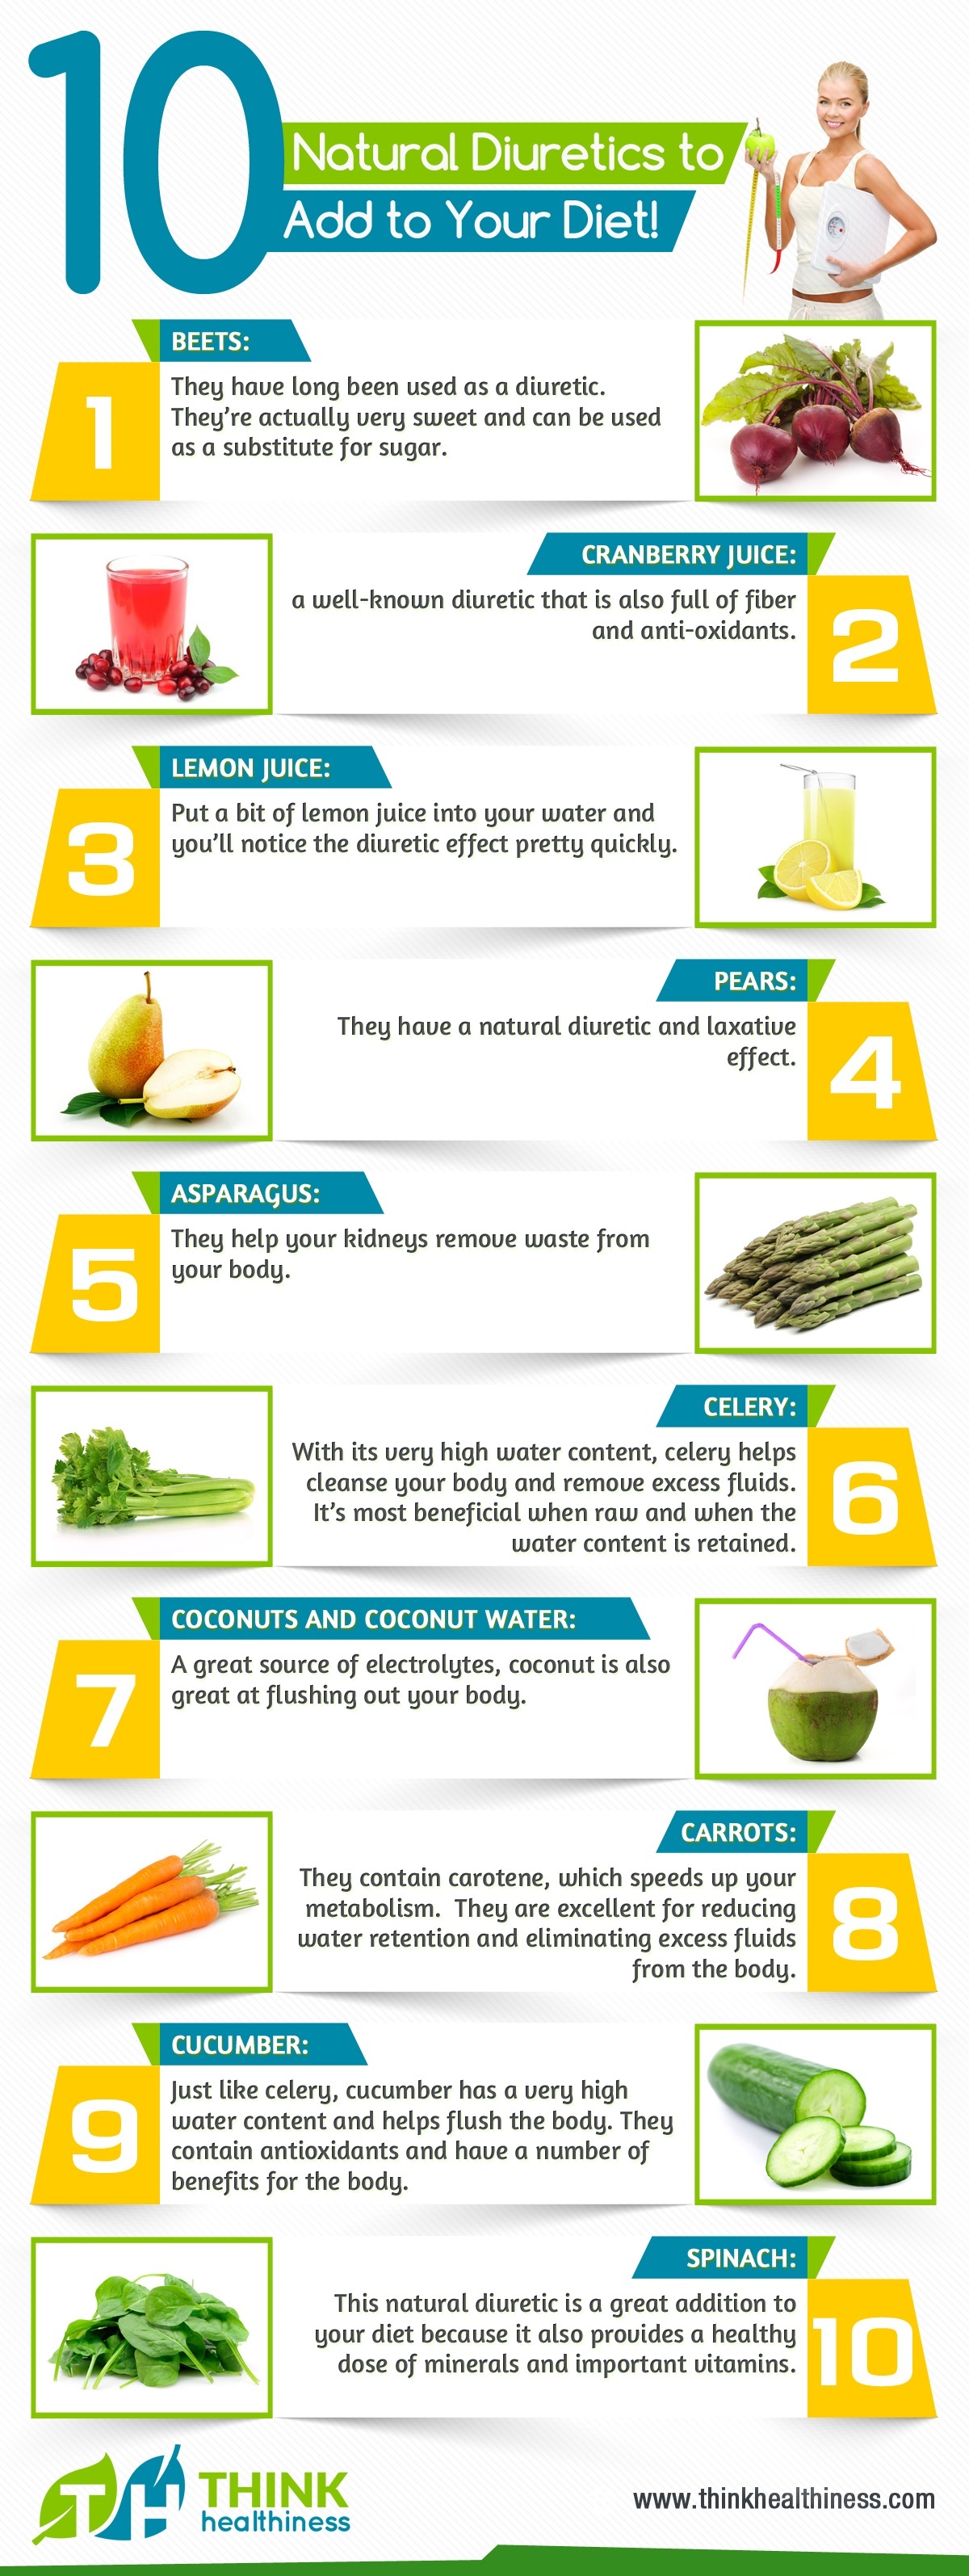 10-Natural-Diuretic-Foods-to-Add-to-Your-Diet-infographic